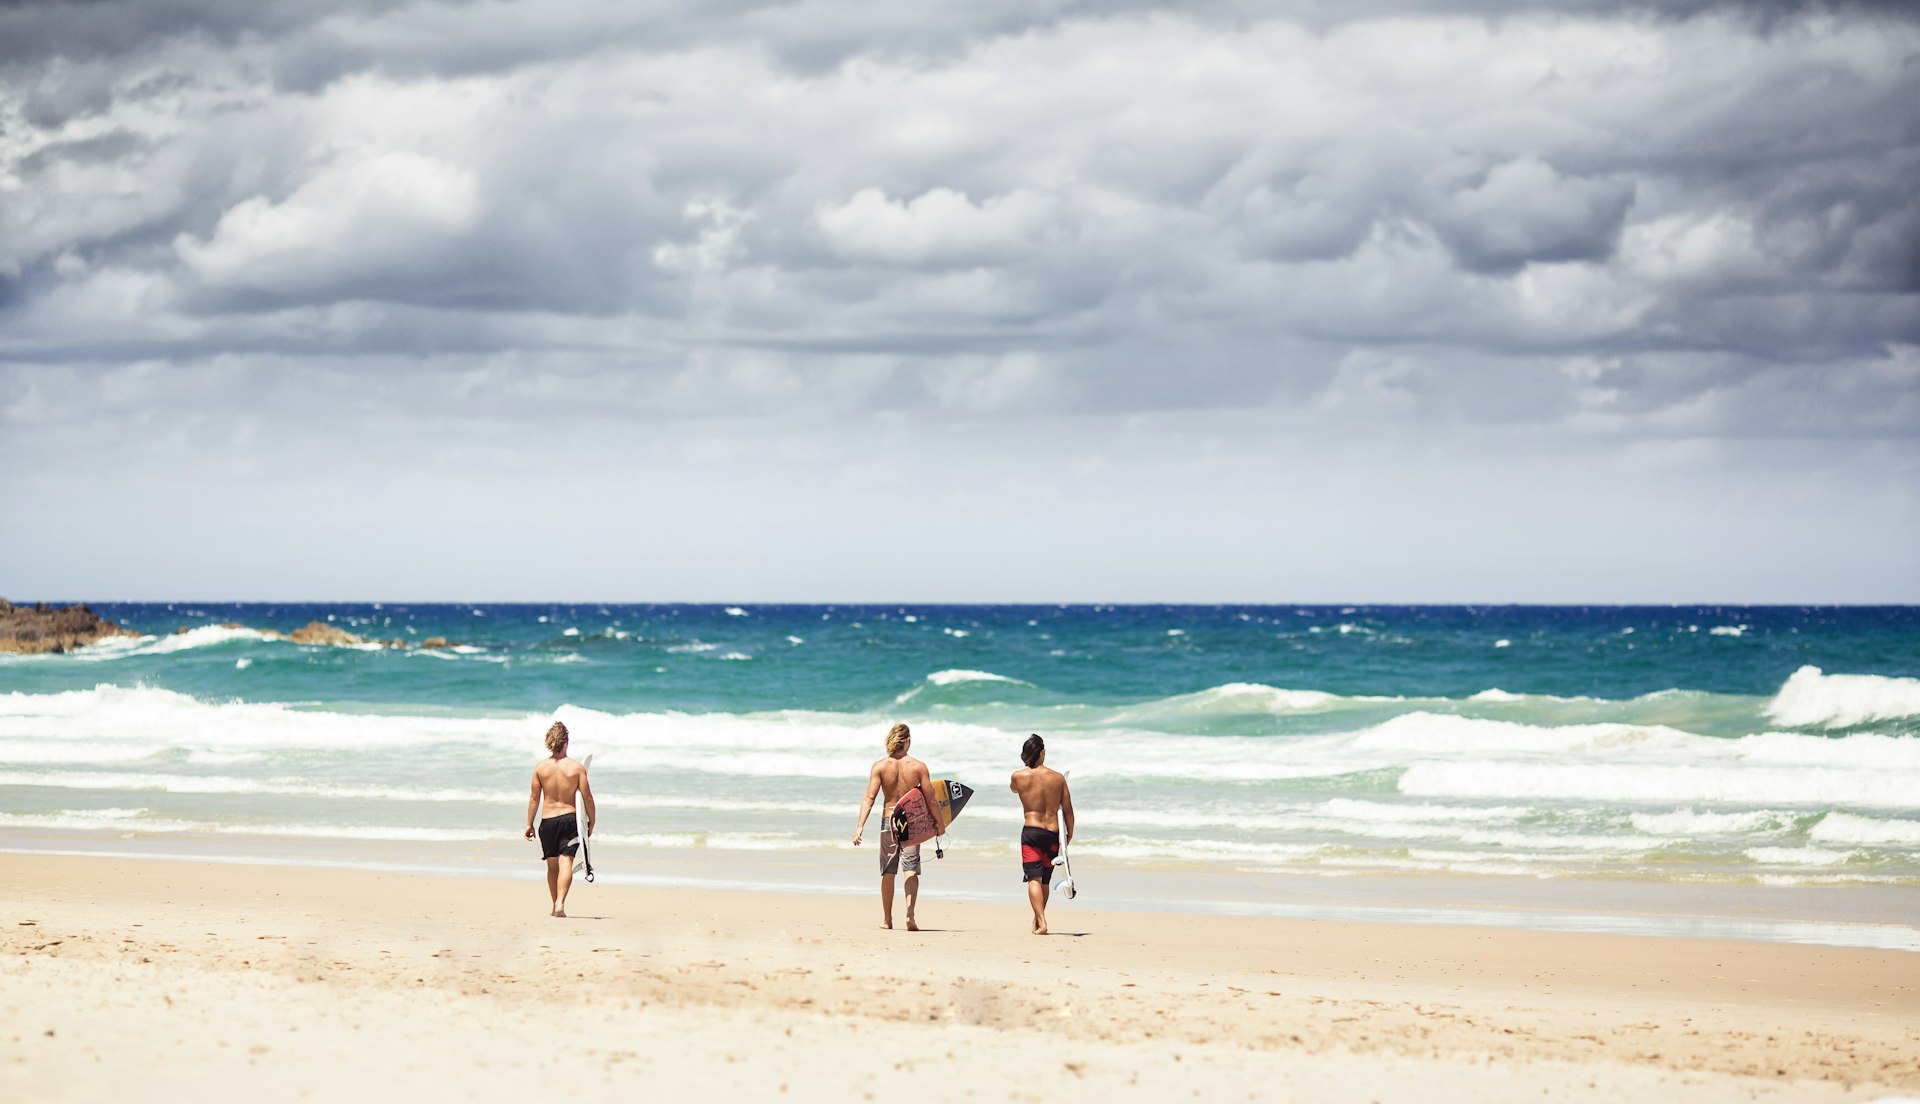 Surfers goes into the water with surfboards on Byron Bay beach in New South Wales.